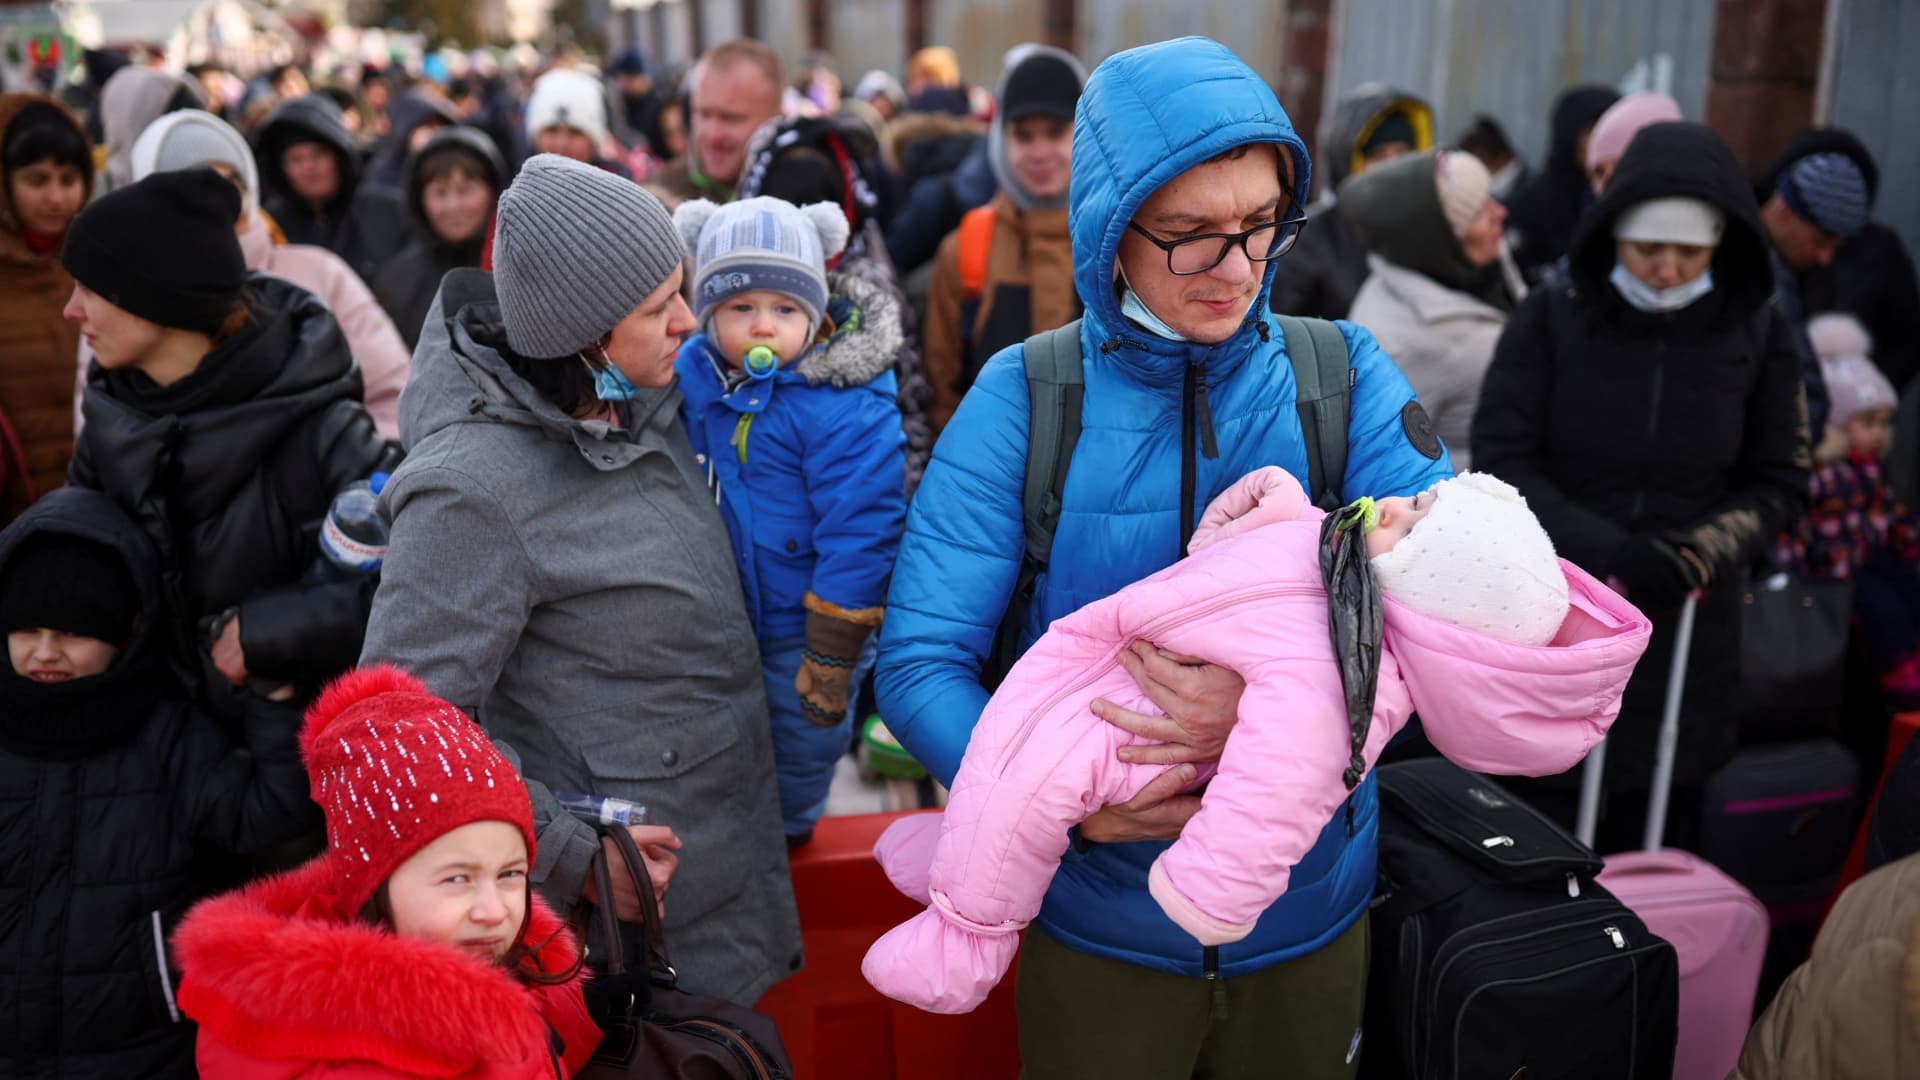 People who have fled Russia's invasion of Ukraine wait at the Shehyni border crossing to enter Poland, near Mostyska, Ukraine March 1, 2022.